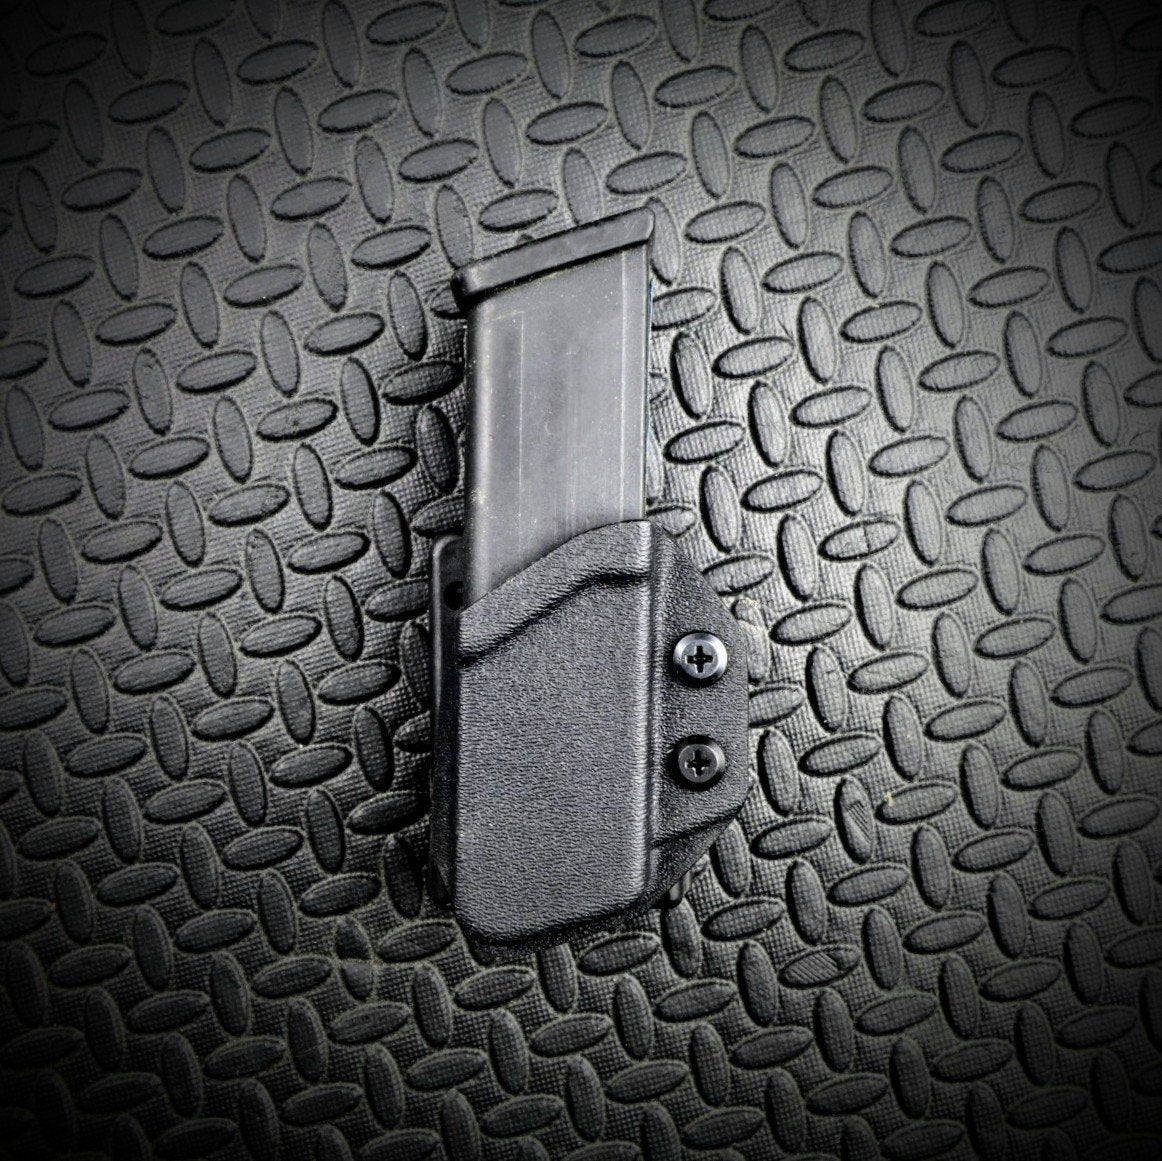 Competition Single Mag Pouch - Gen 2 for Glock 9MM and 40SW (Black - Teklok) Kydex Holsters and Mag Pouches